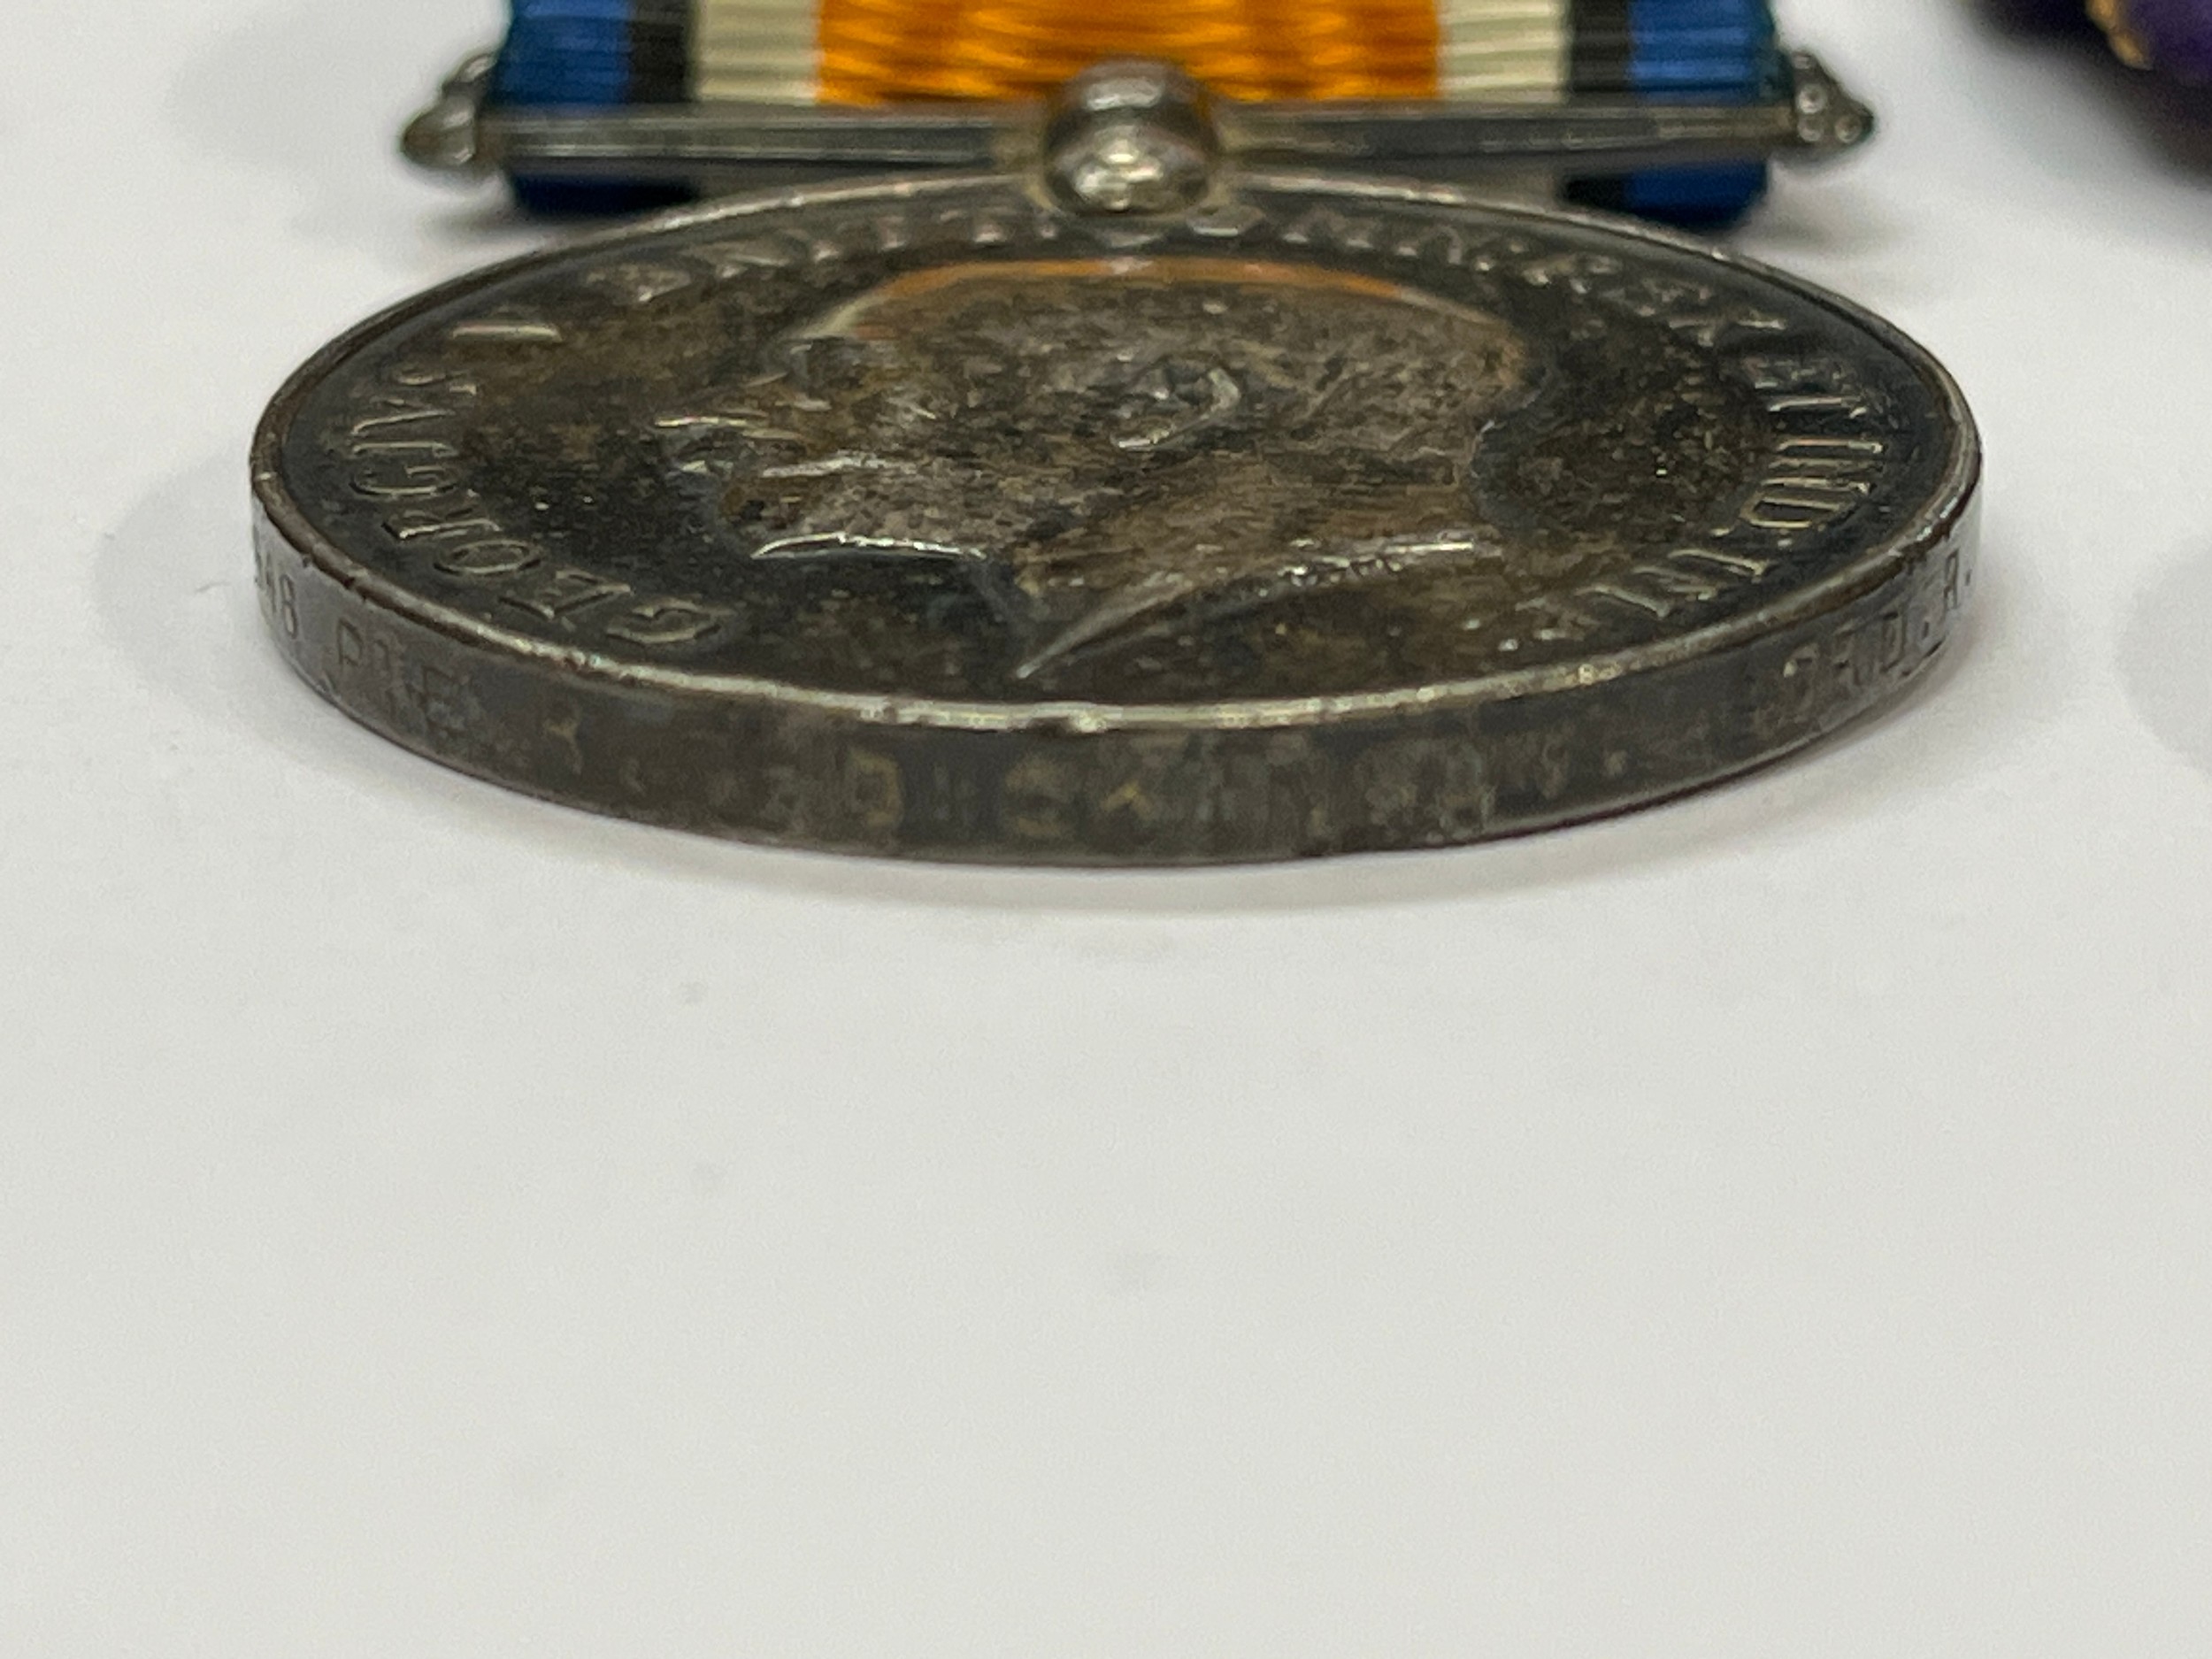 A WWI 1915 medal trio named to 14848 PTE. R.G. DICKINSON BORD. R. (named as DICKENSON on 1915 star), - Image 3 of 3